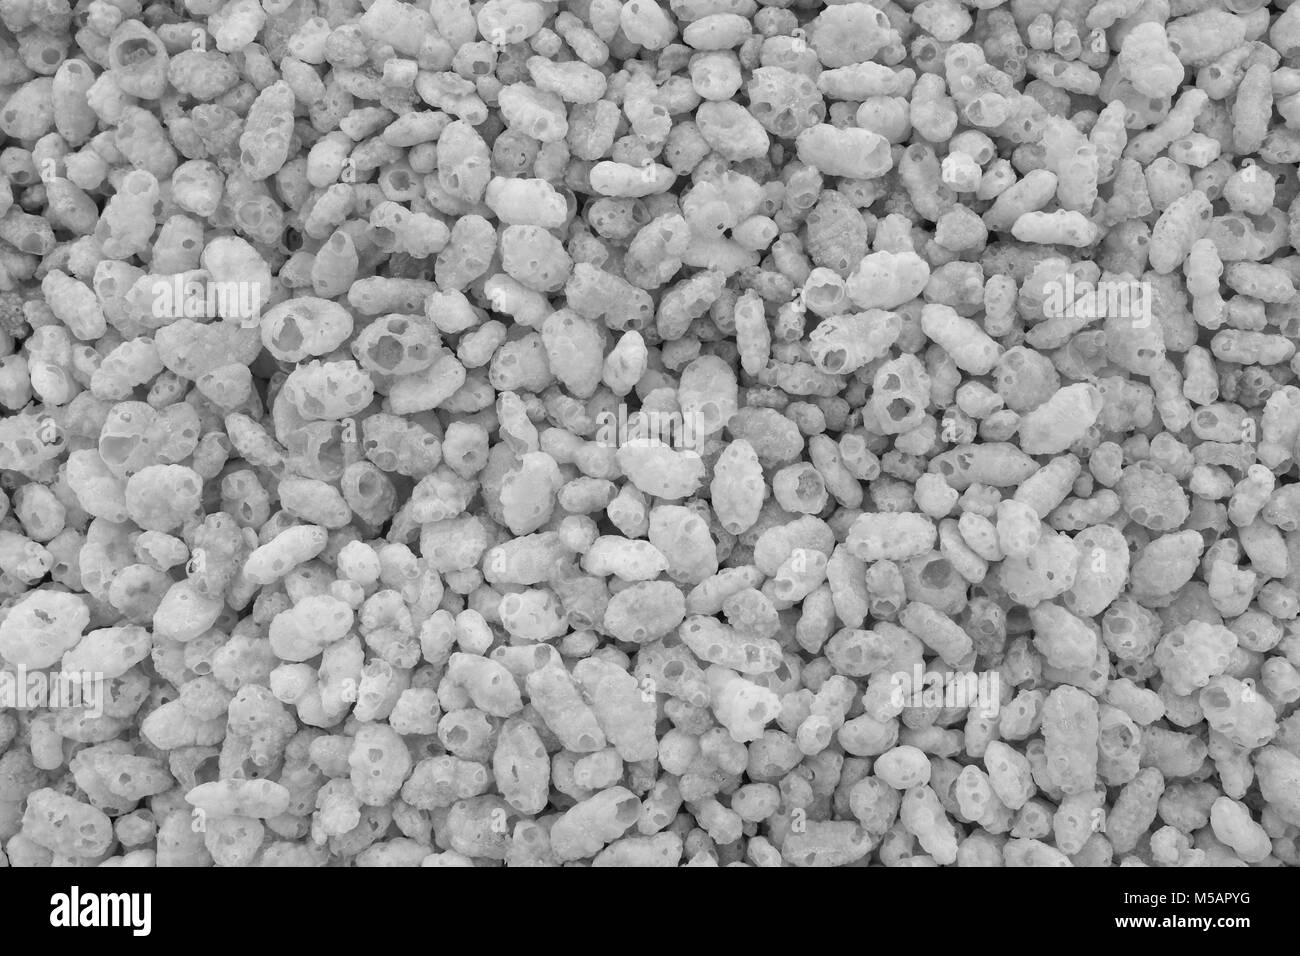 Crisped puffed rice breakfast cereal as an abstract background texture - close detail - monochrome processing Stock Photo